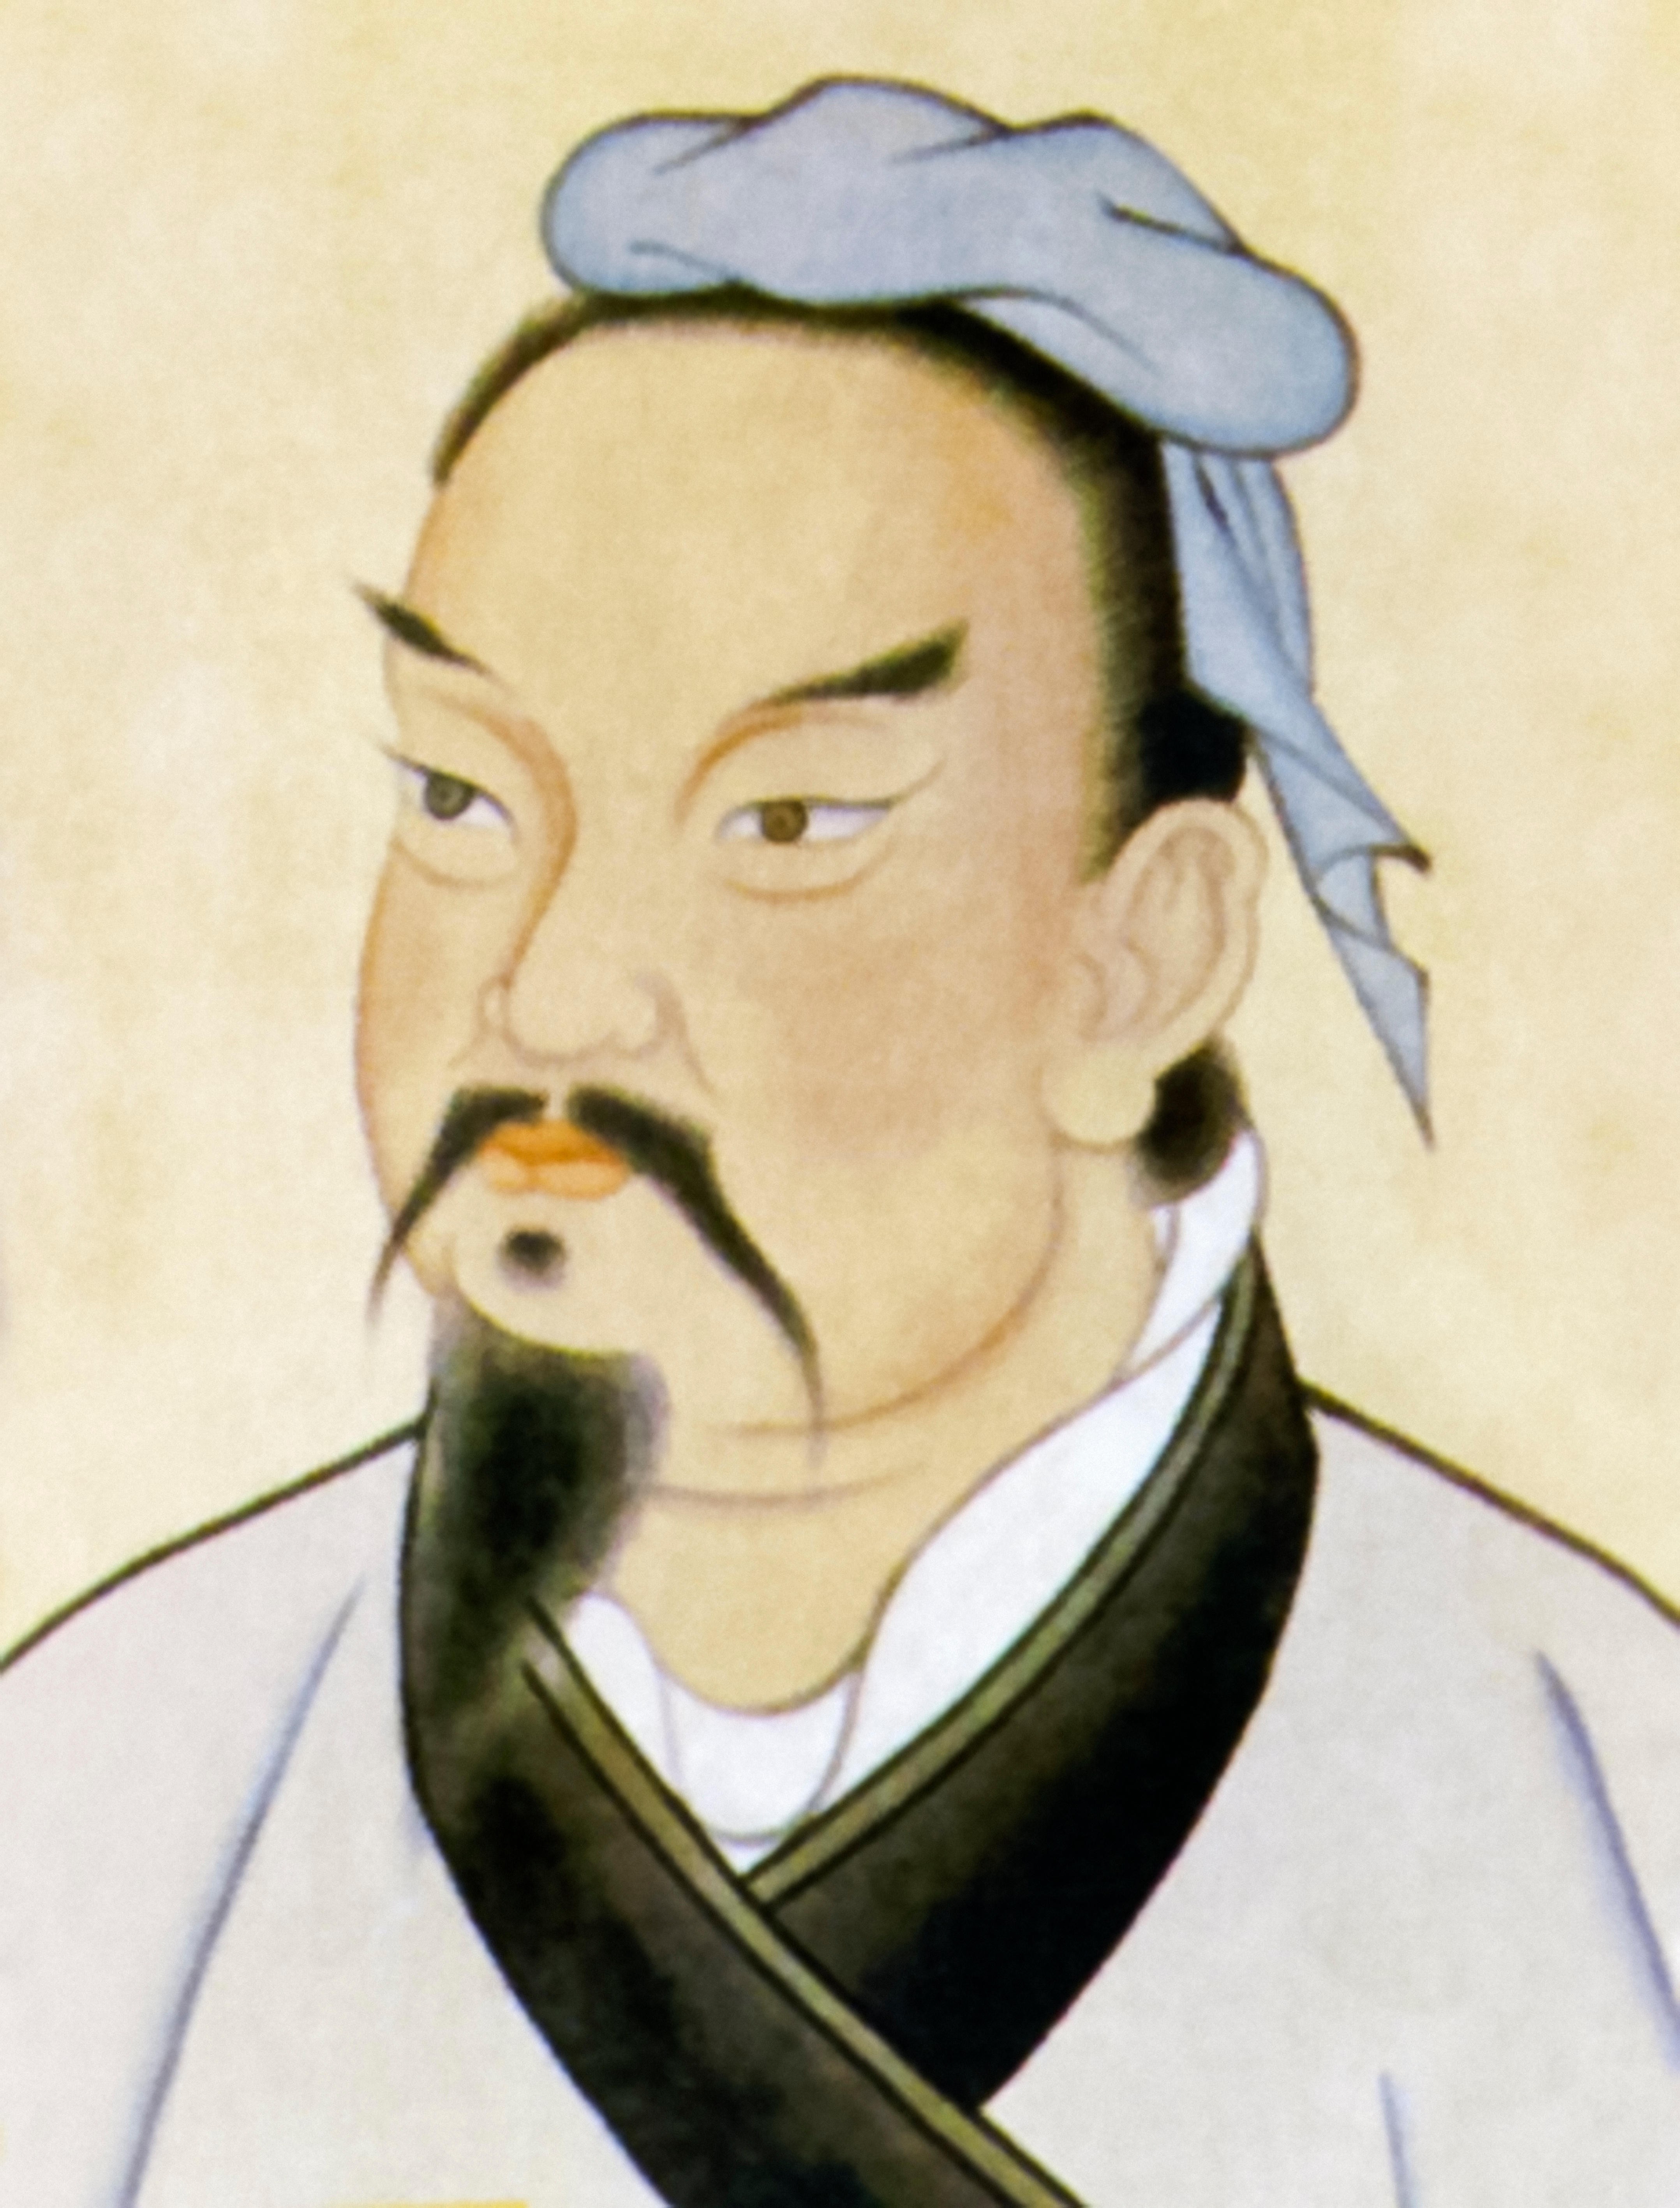 Sun Tzu was the Chinese general and philosopher best remembered as the author of The Art of War. Photo: Alamy